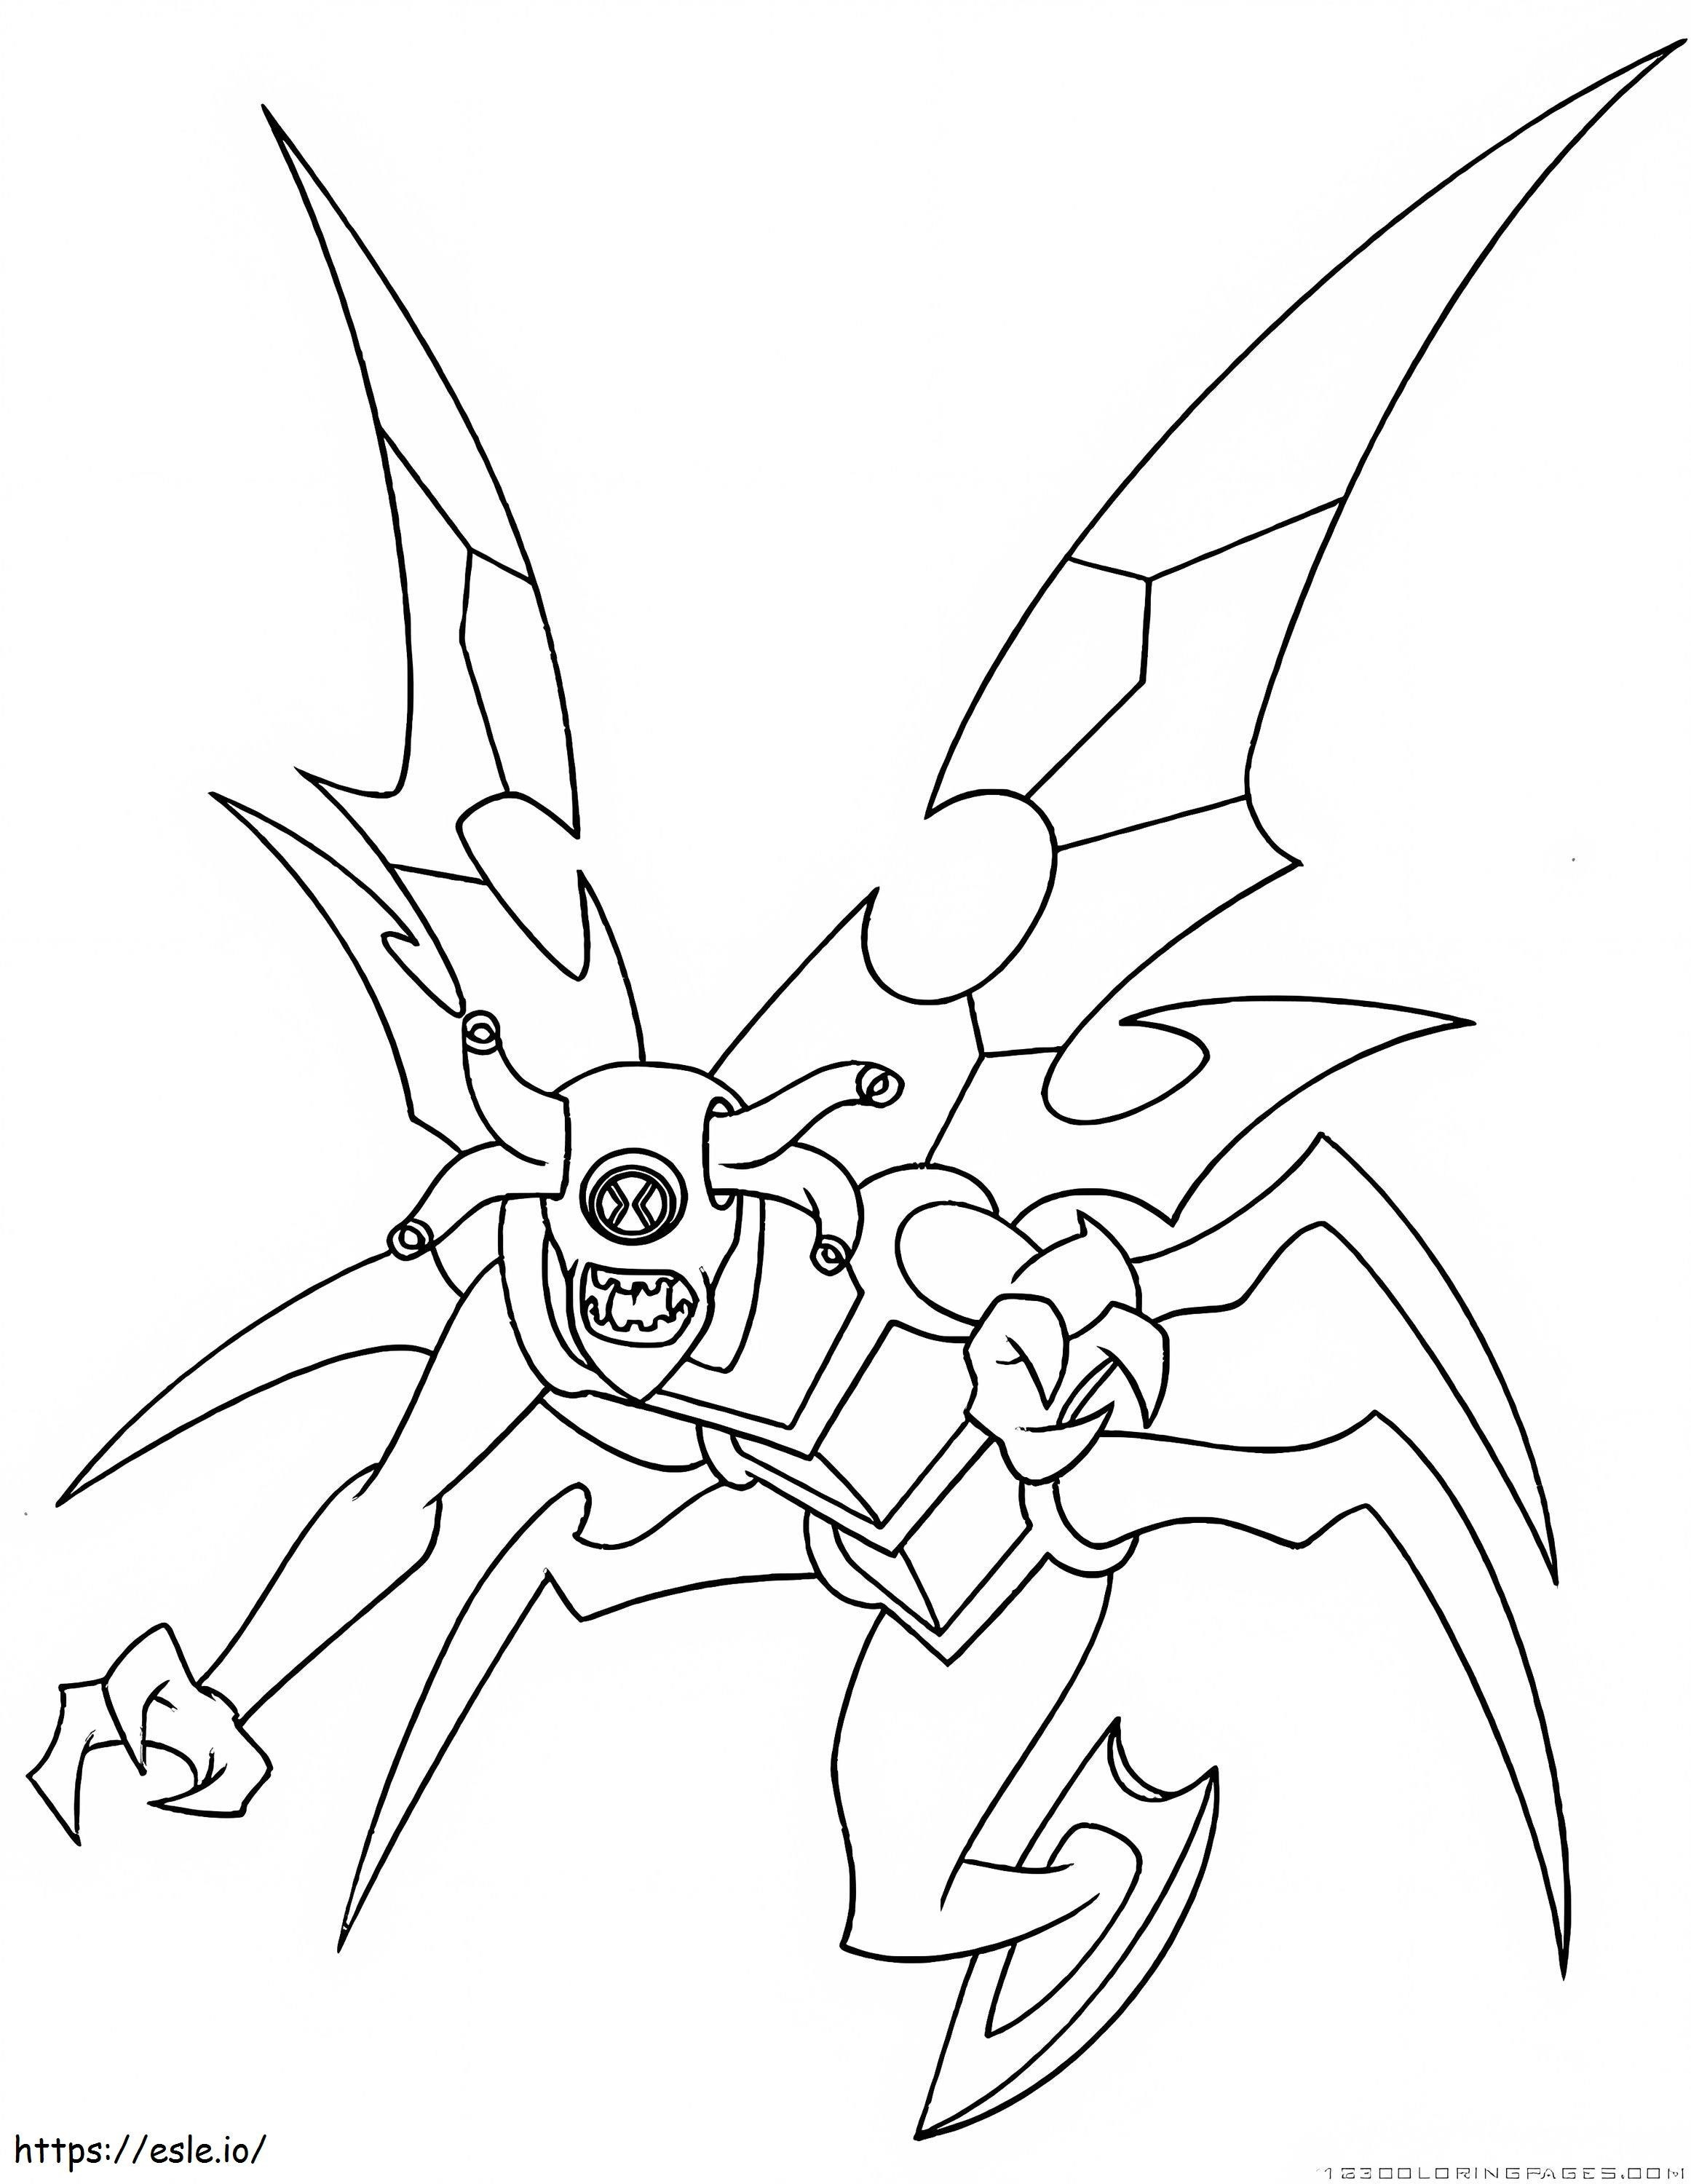 1542161812 Ben10 3 coloring page